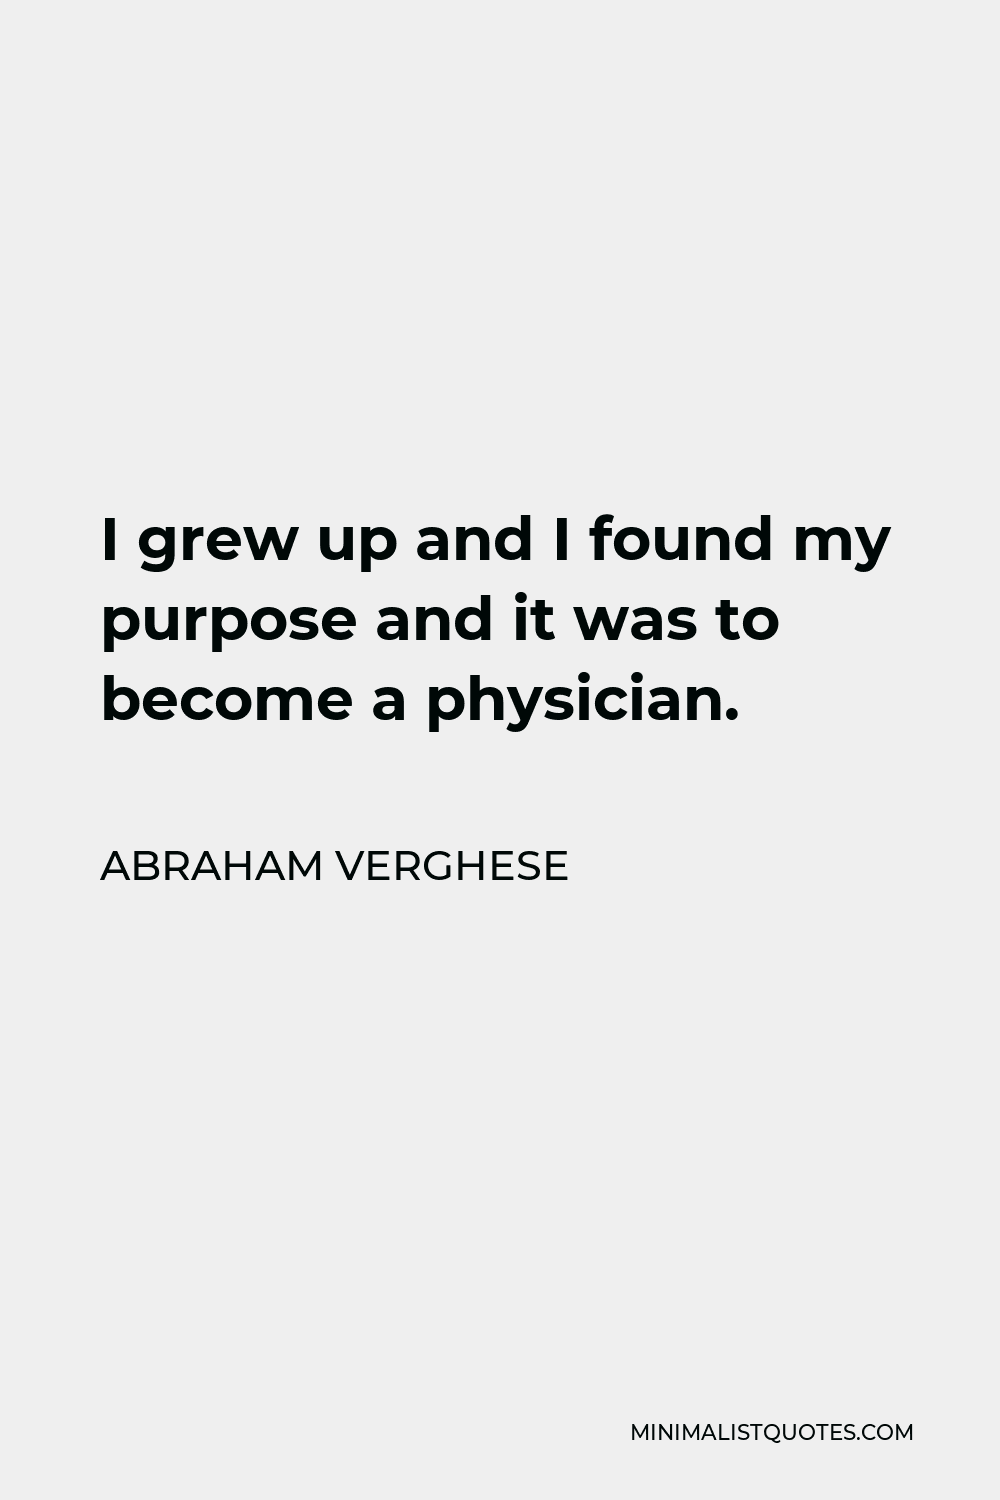 Abraham Verghese Quote - I grew up and I found my purpose and it was to become a physician.